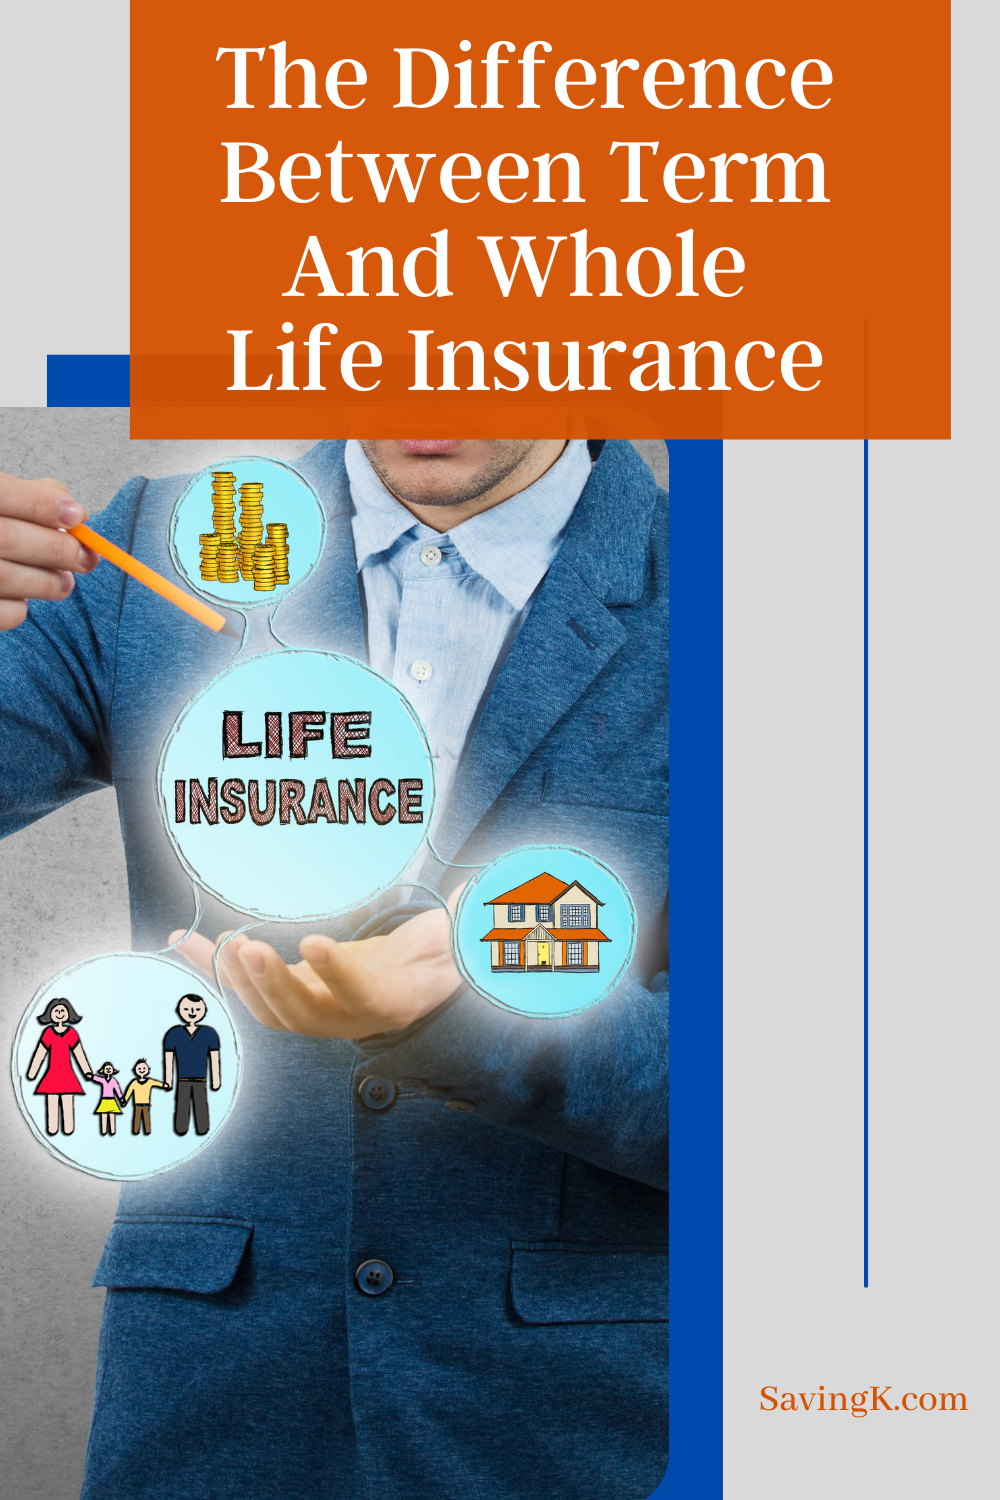 The Difference Between Term And Whole Life Insurance